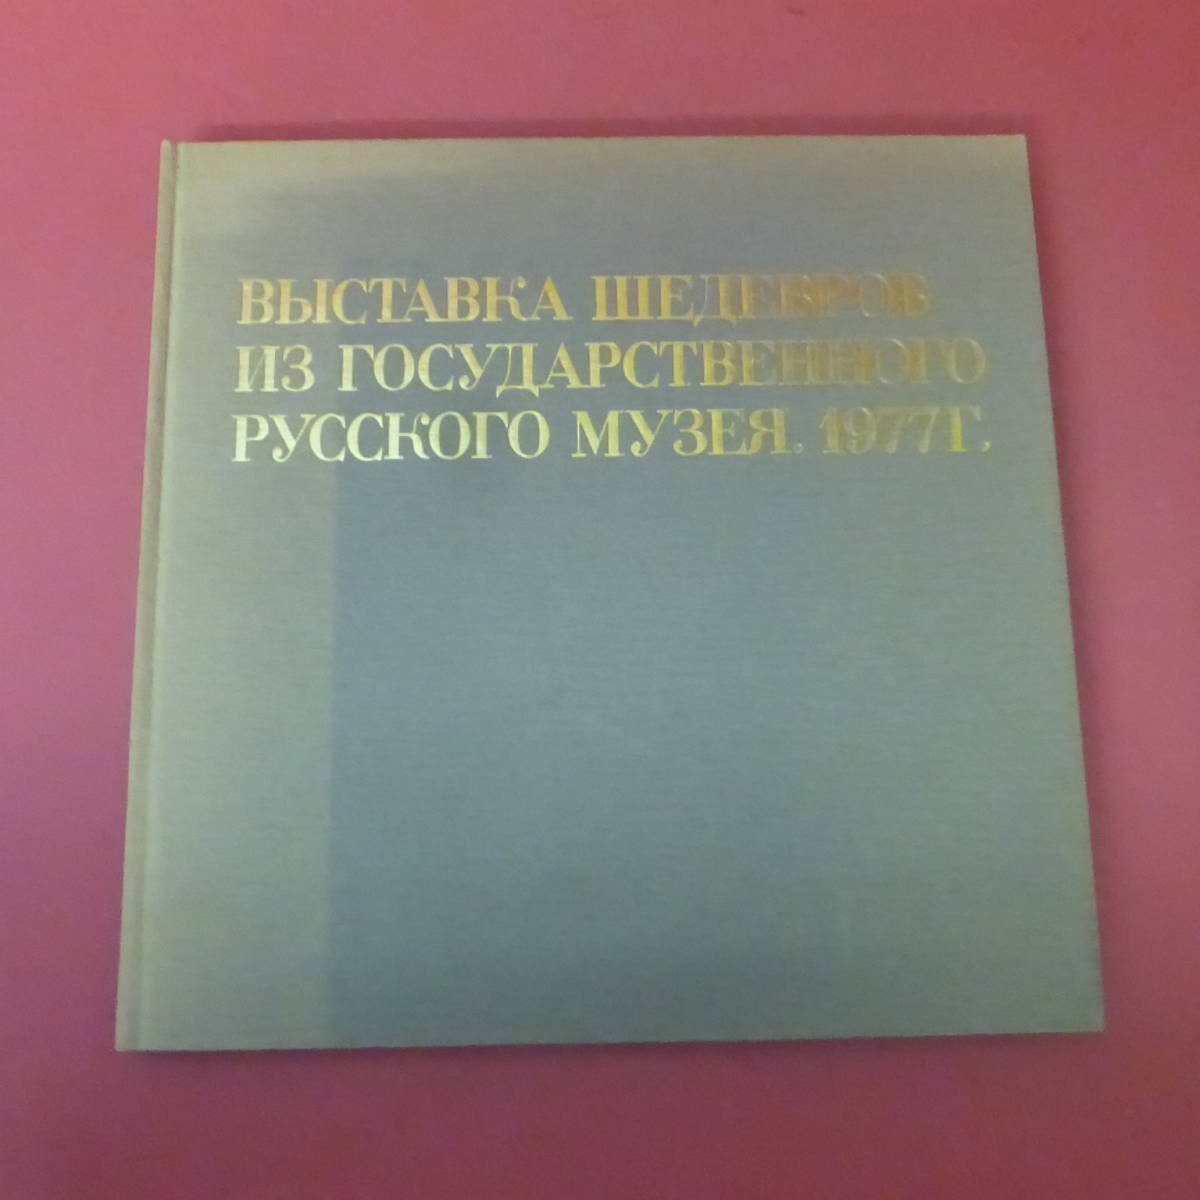 YN2-231012☆Exhibition of Masterpieces from the Russian Museum, Centered on The Ninth Wave 1977, Painting, Art Book, Collection, Catalog